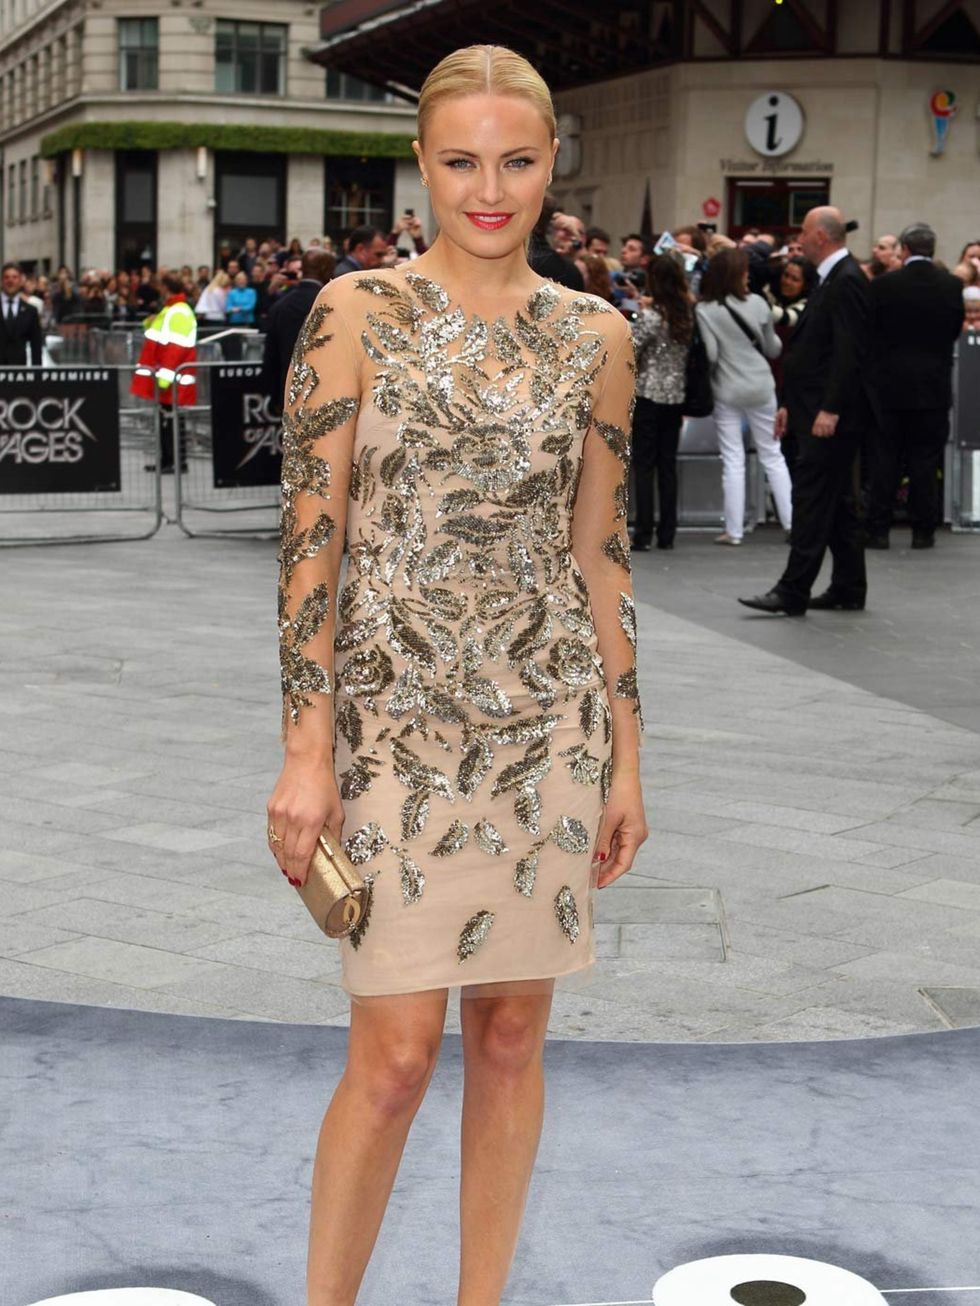 <p>Swedish actress, Malin Akerman (who plays a Rolling Stone reporter called Constance Sack), wore a Marchesa dress, Jimmy Choo shoes and Harry Winston jewellery at the Rock Of Ages premiere in London.</p>